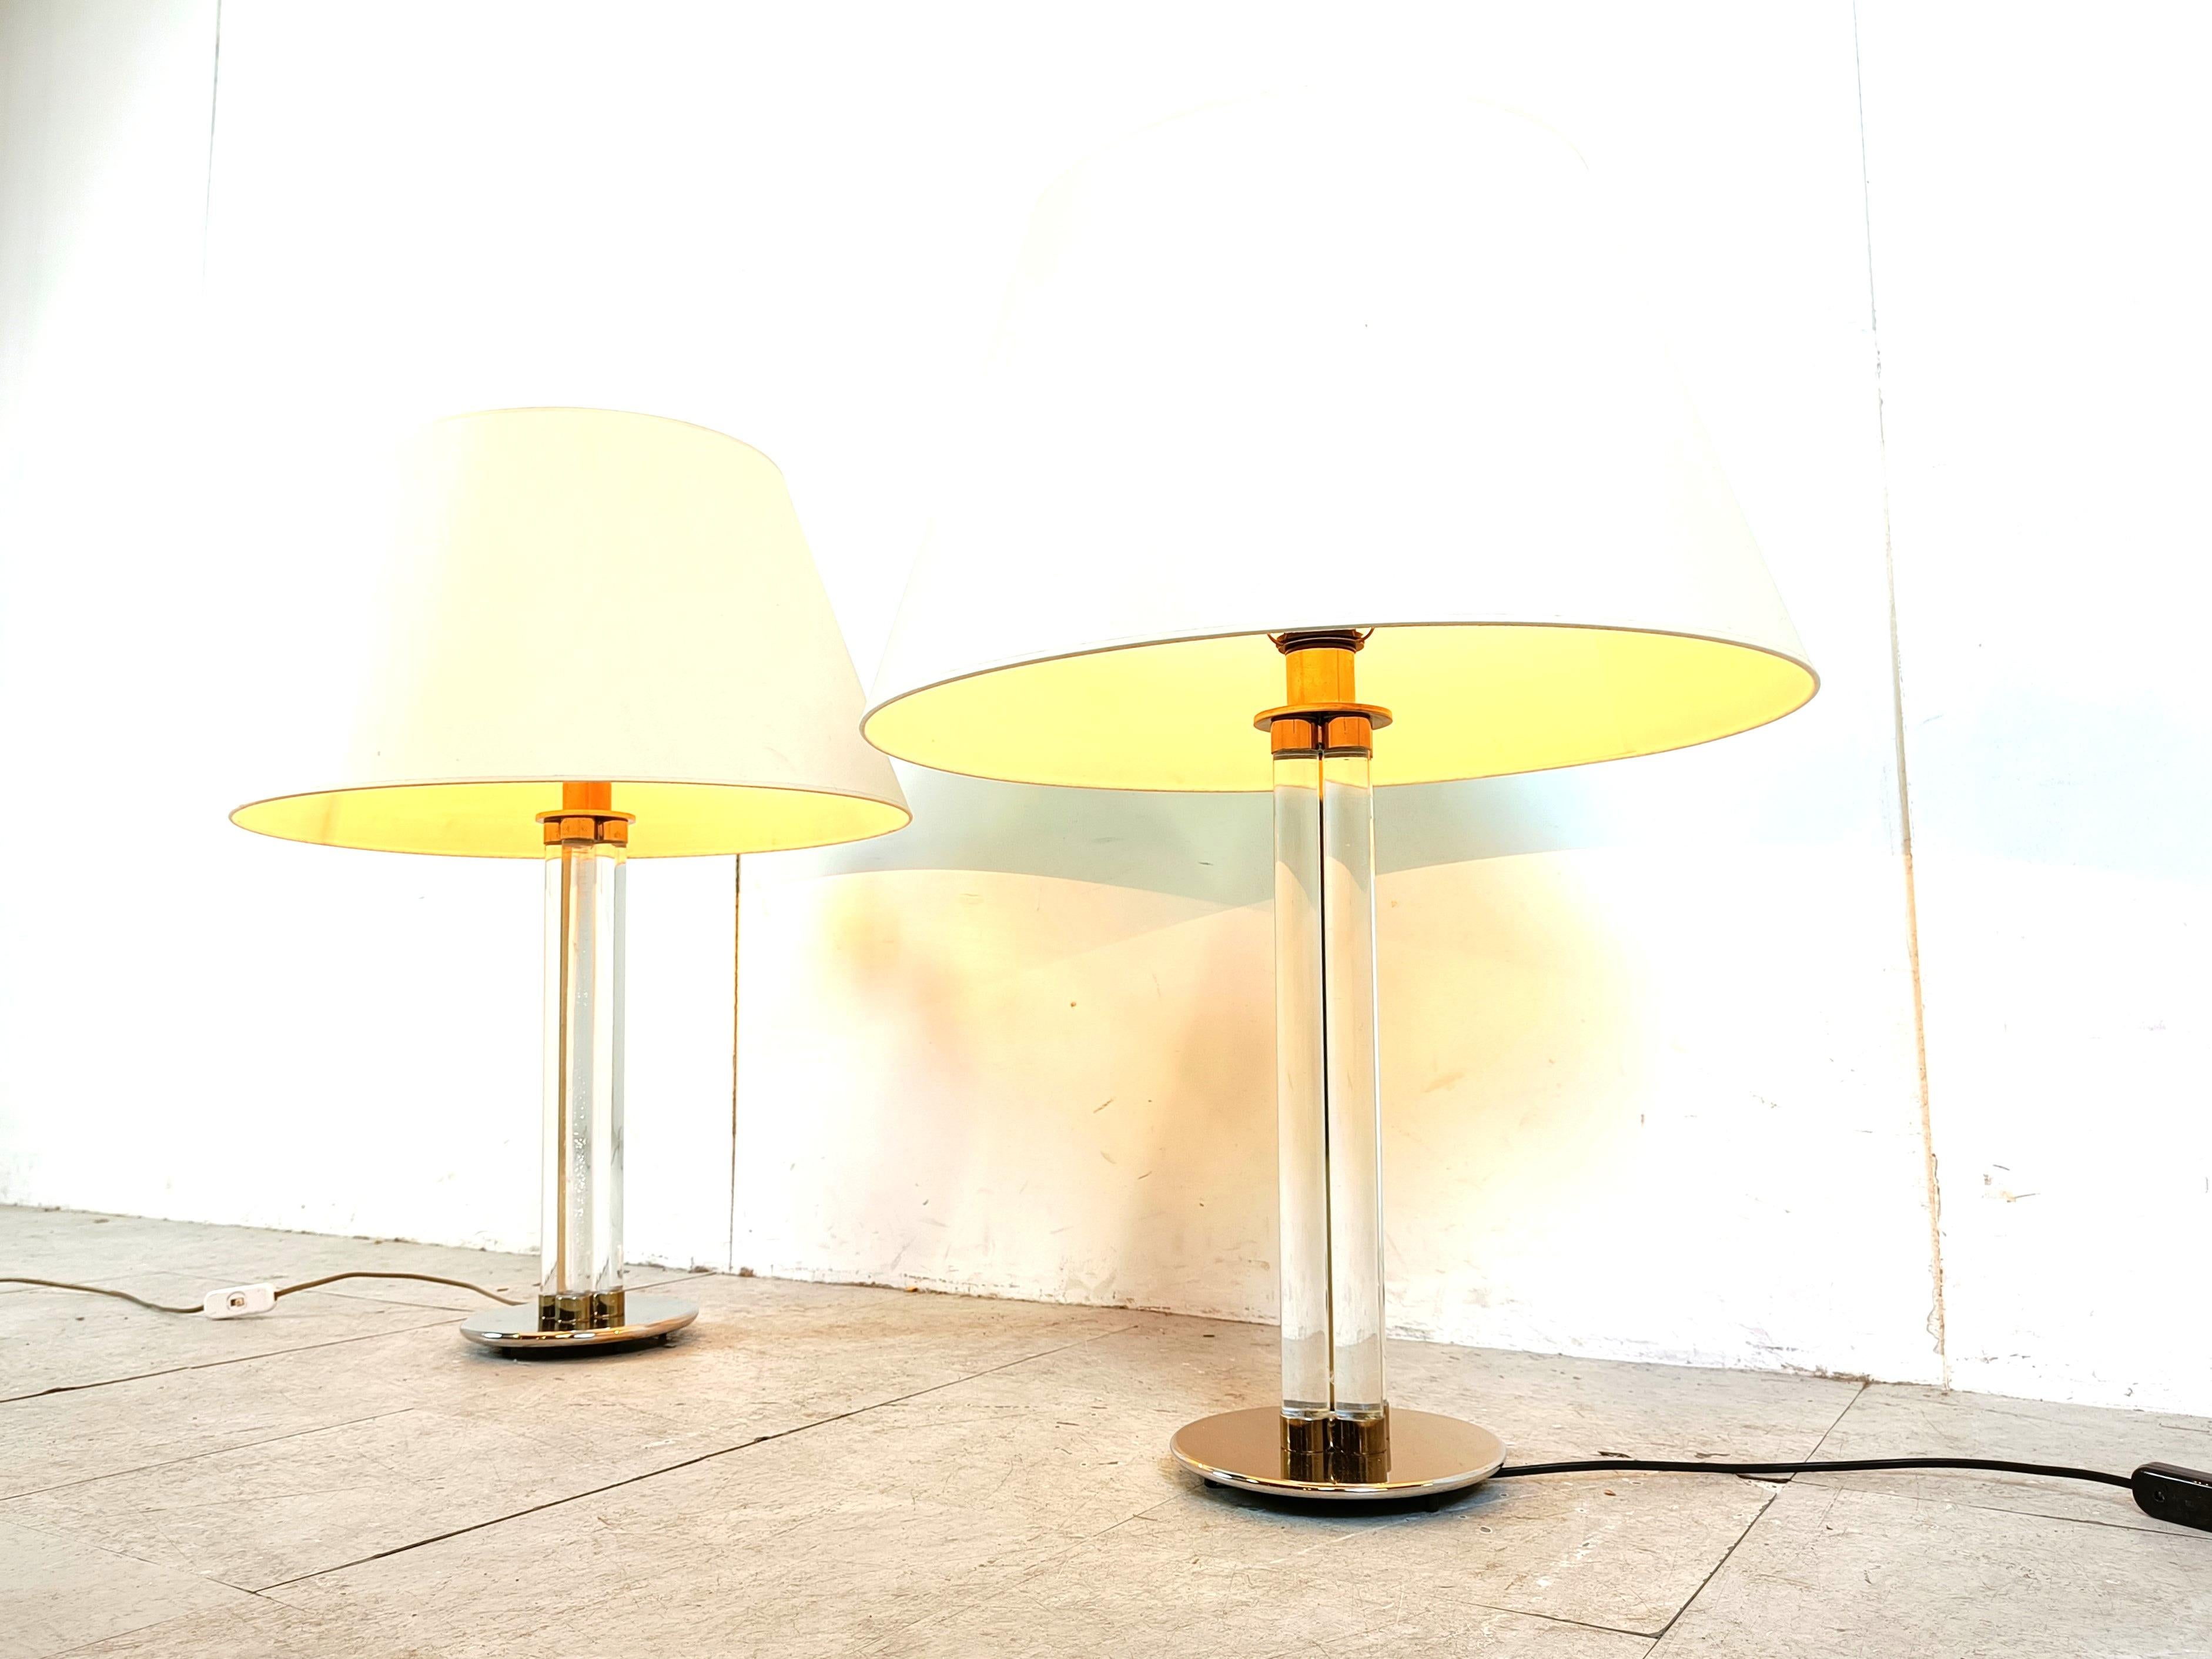 Pair of large lucite table lamps.

They where acquired from a large mansion in Belgium and are very stately lamps.

Good condition

Tested and ready to use with a regular E27 light bulb

1970s - Belgium

Dimensions:
height: 80cm
Diameter: